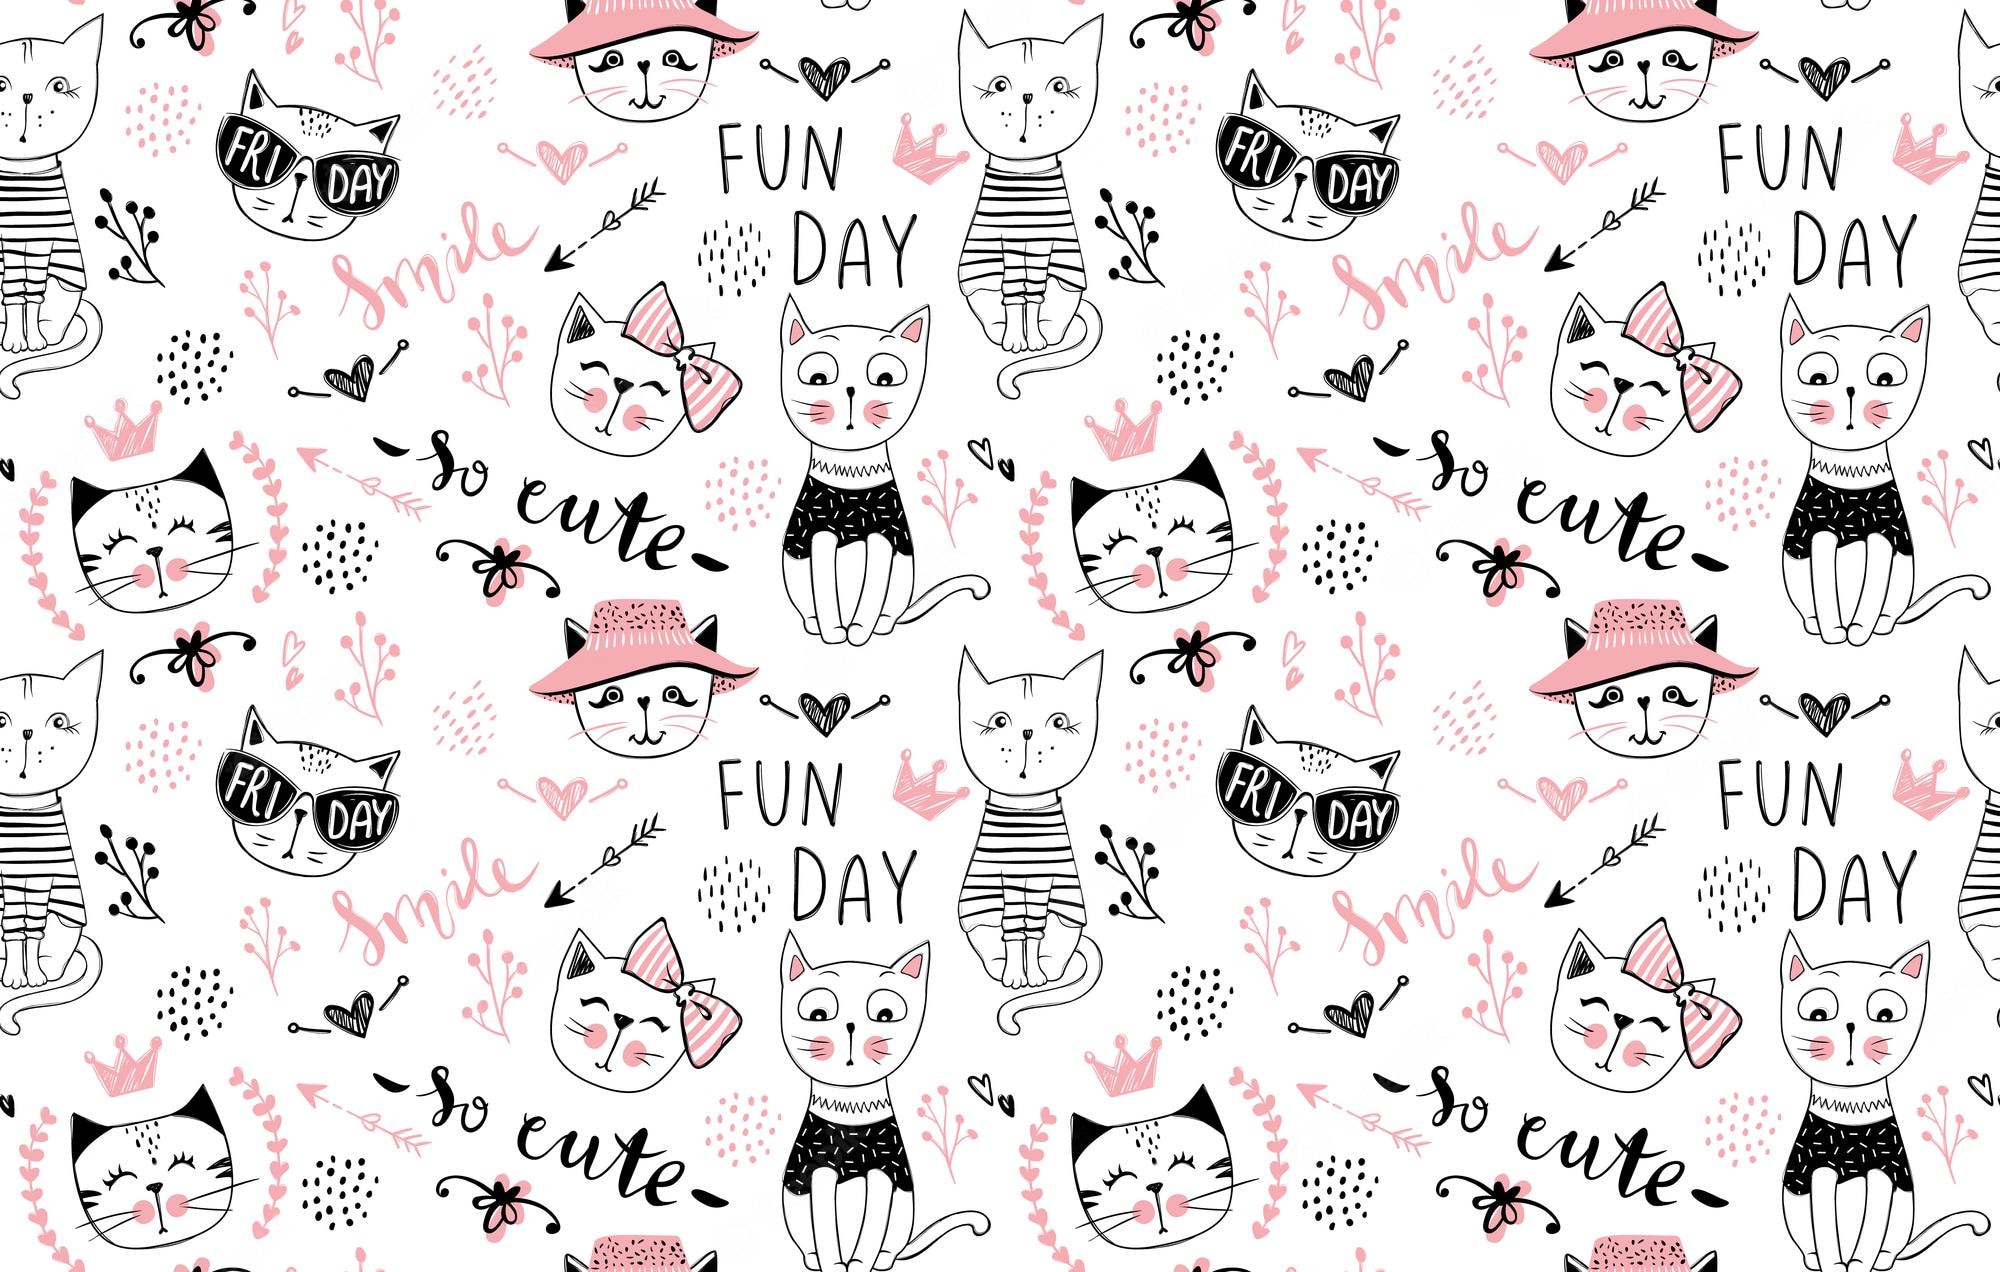 Premium Vector. Vector Fashion Cat Seamless Pattern. Cute Kitten Illustration In Sketch Style. Cartoon Animals Background. Doodle Kitty. Ideal For Fabric, Wallpaper, Wrapping Paper, Textile, Bedding, T Shirt Print